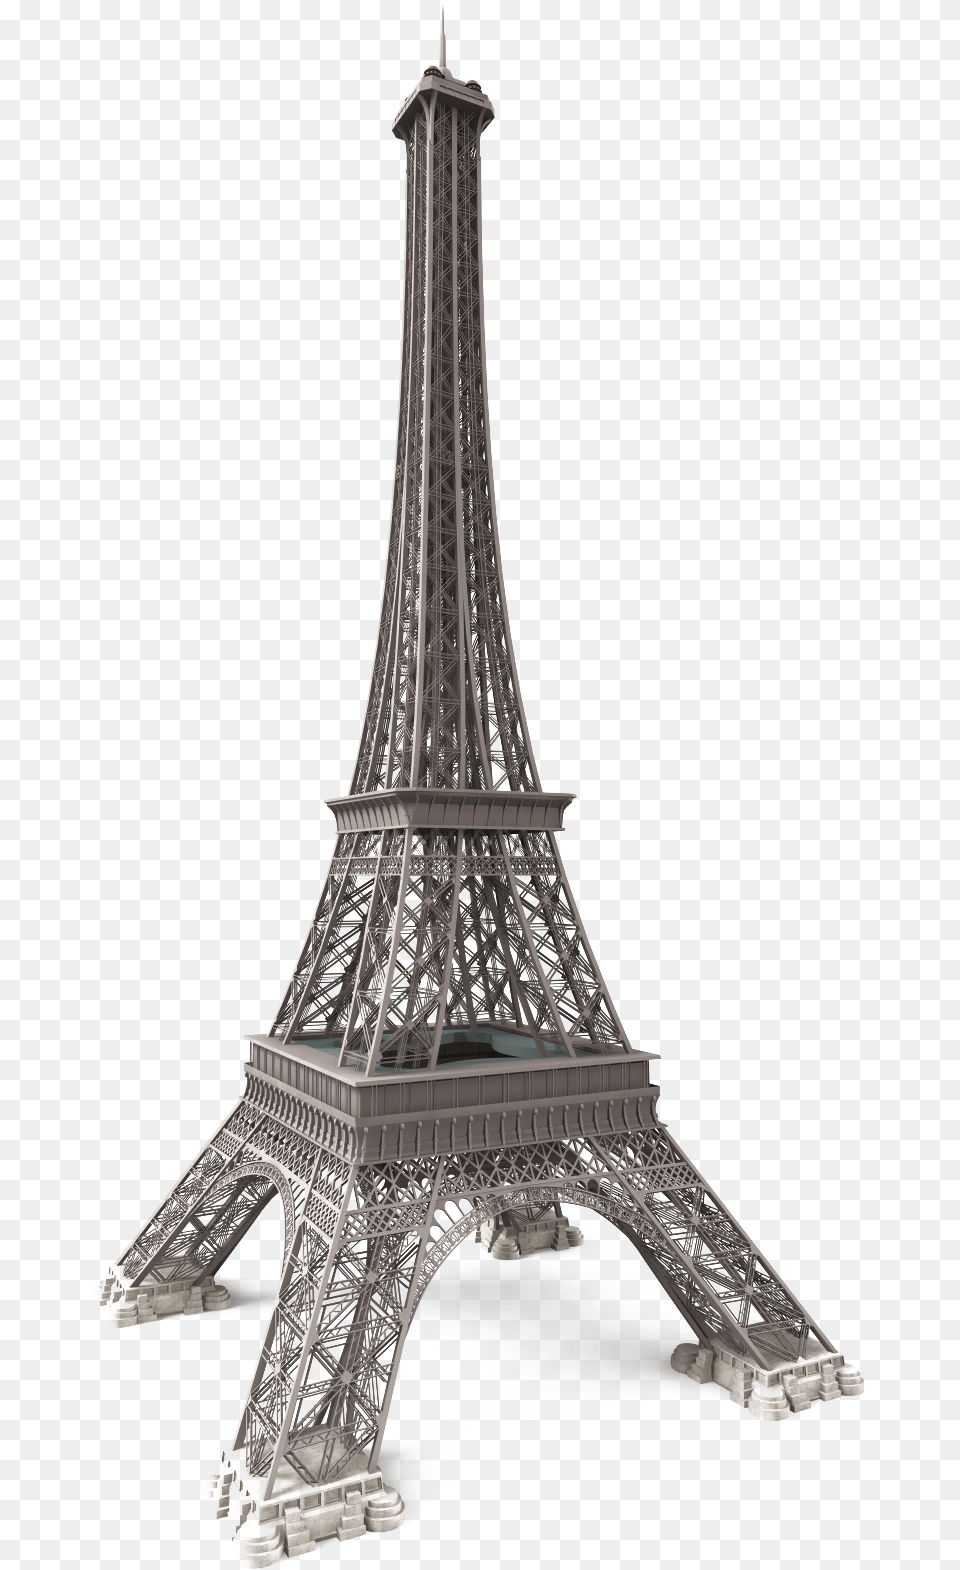 Eiffel Tower 3d Computer Graphics 3d Modeling 3d Printing, Architecture, Building Png Image